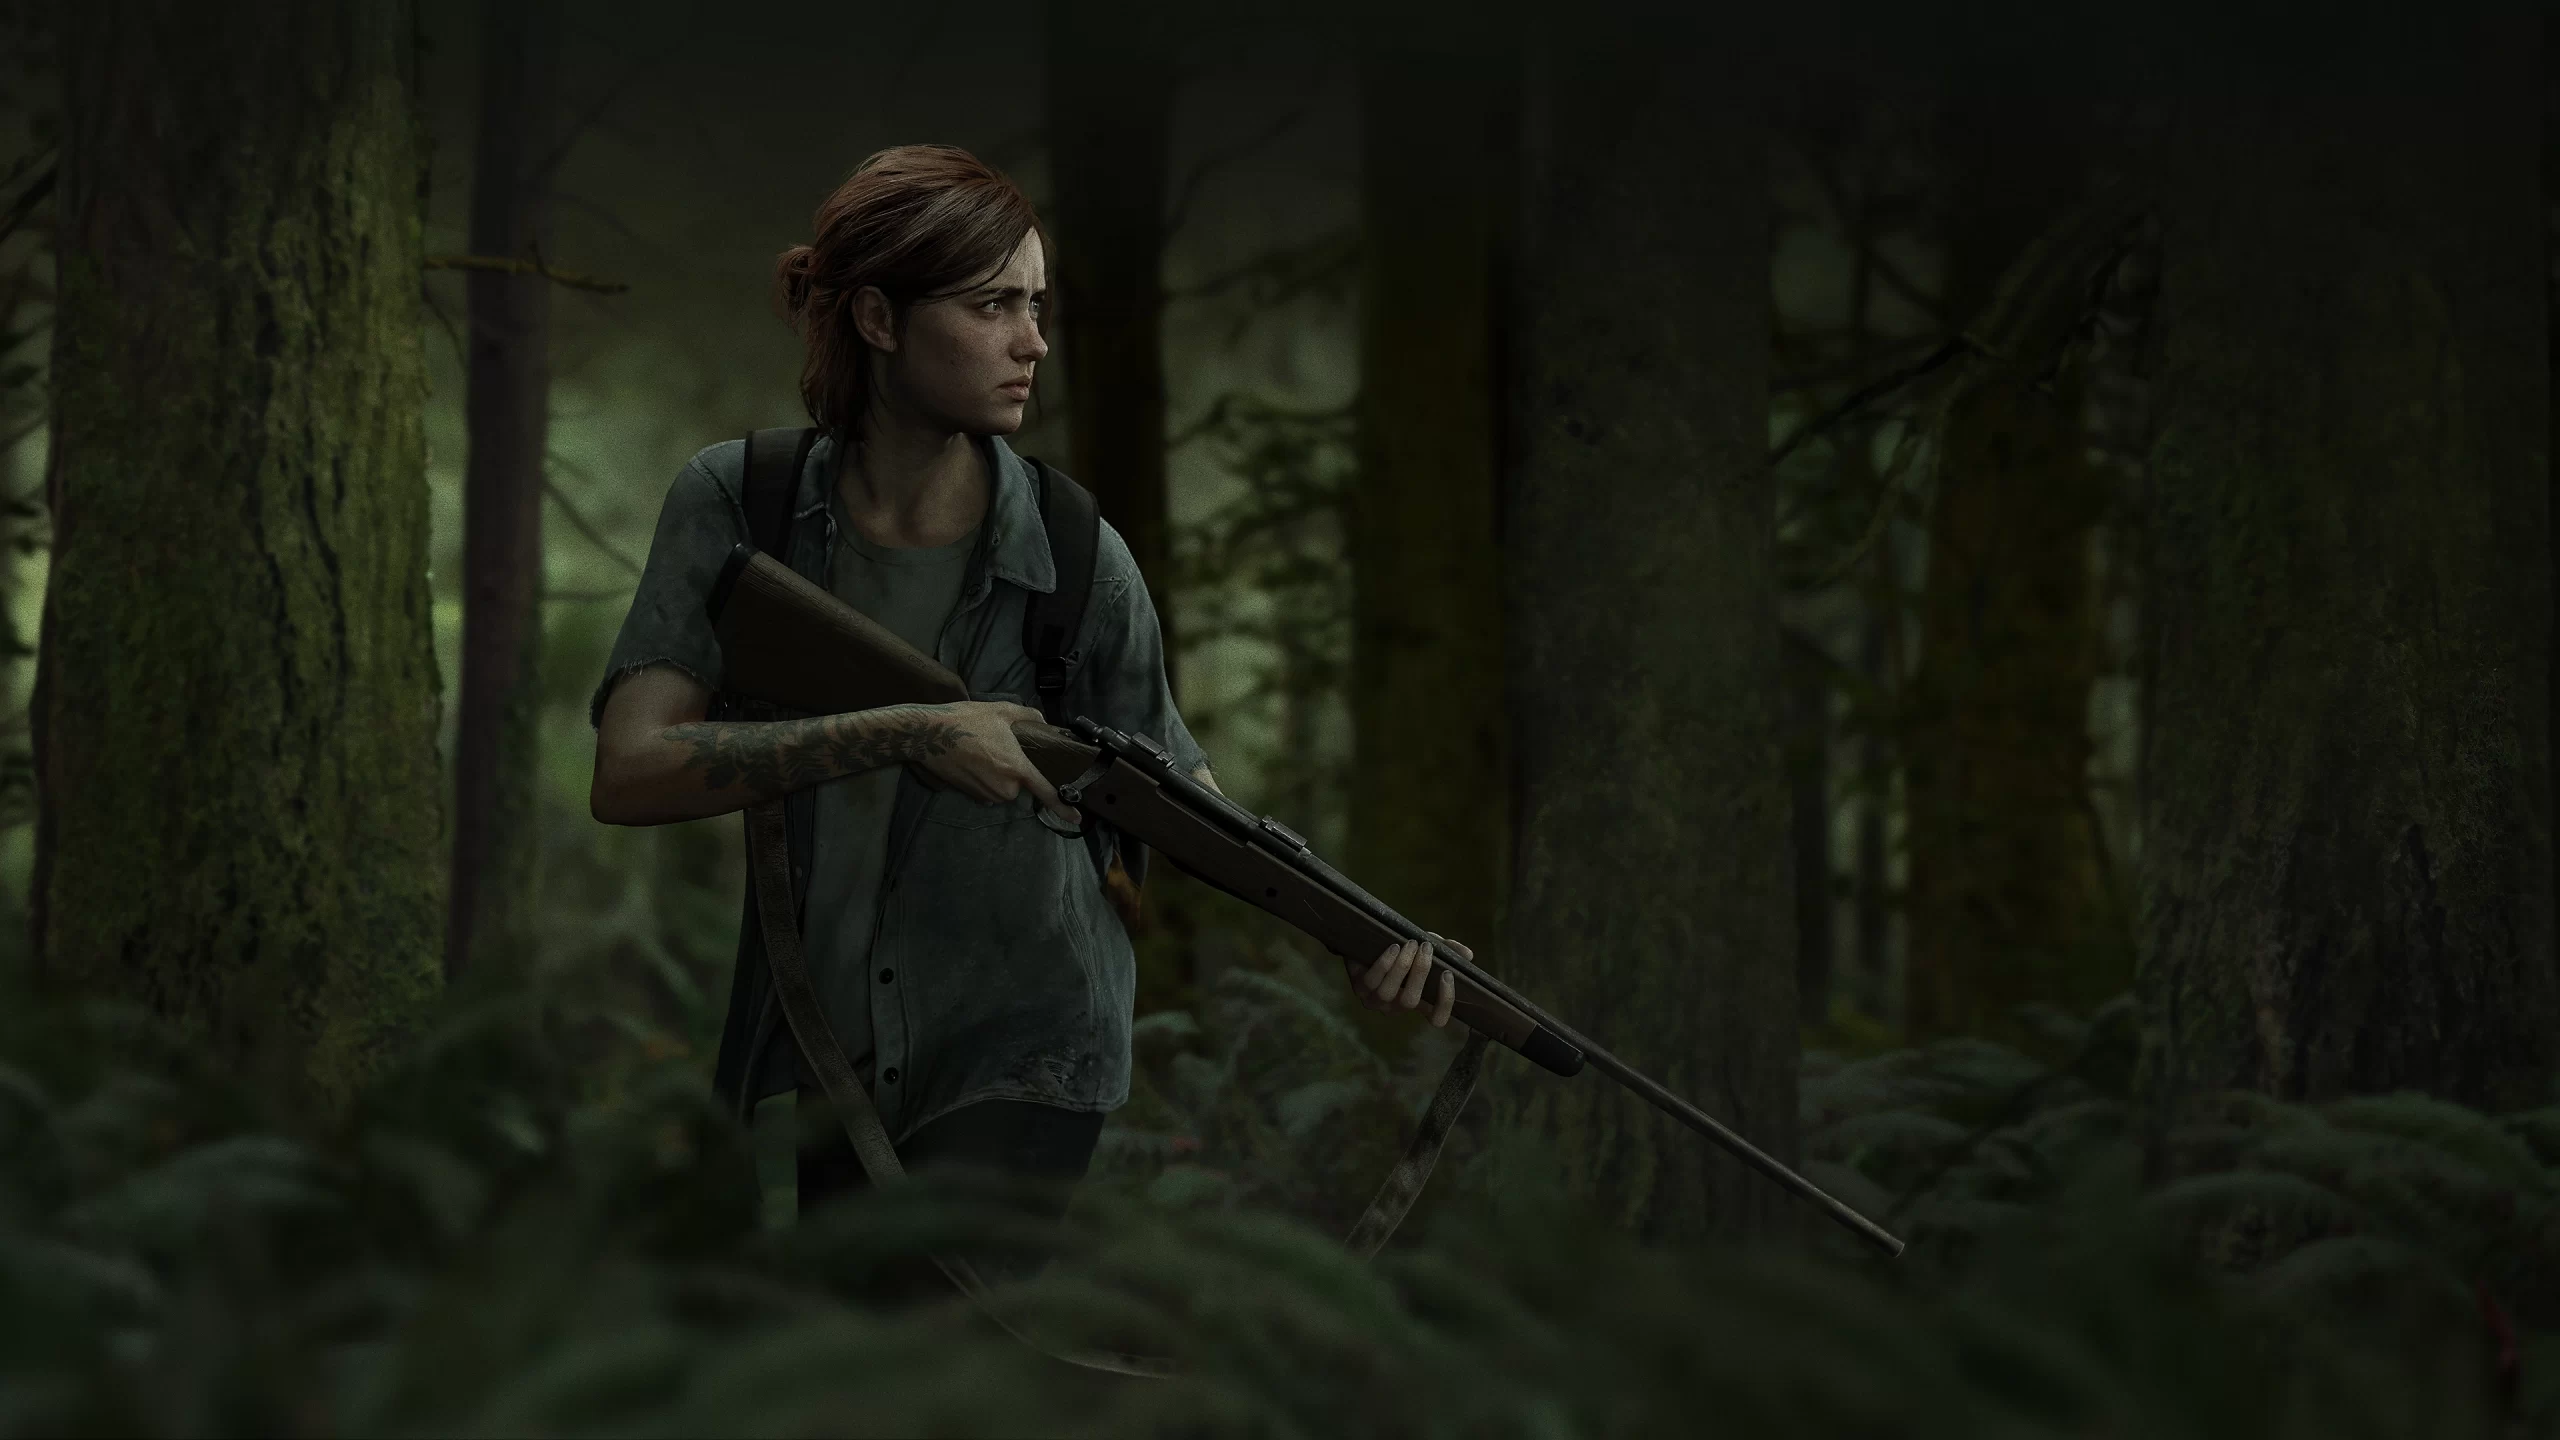 The Last of Us director is working on an unannounced game